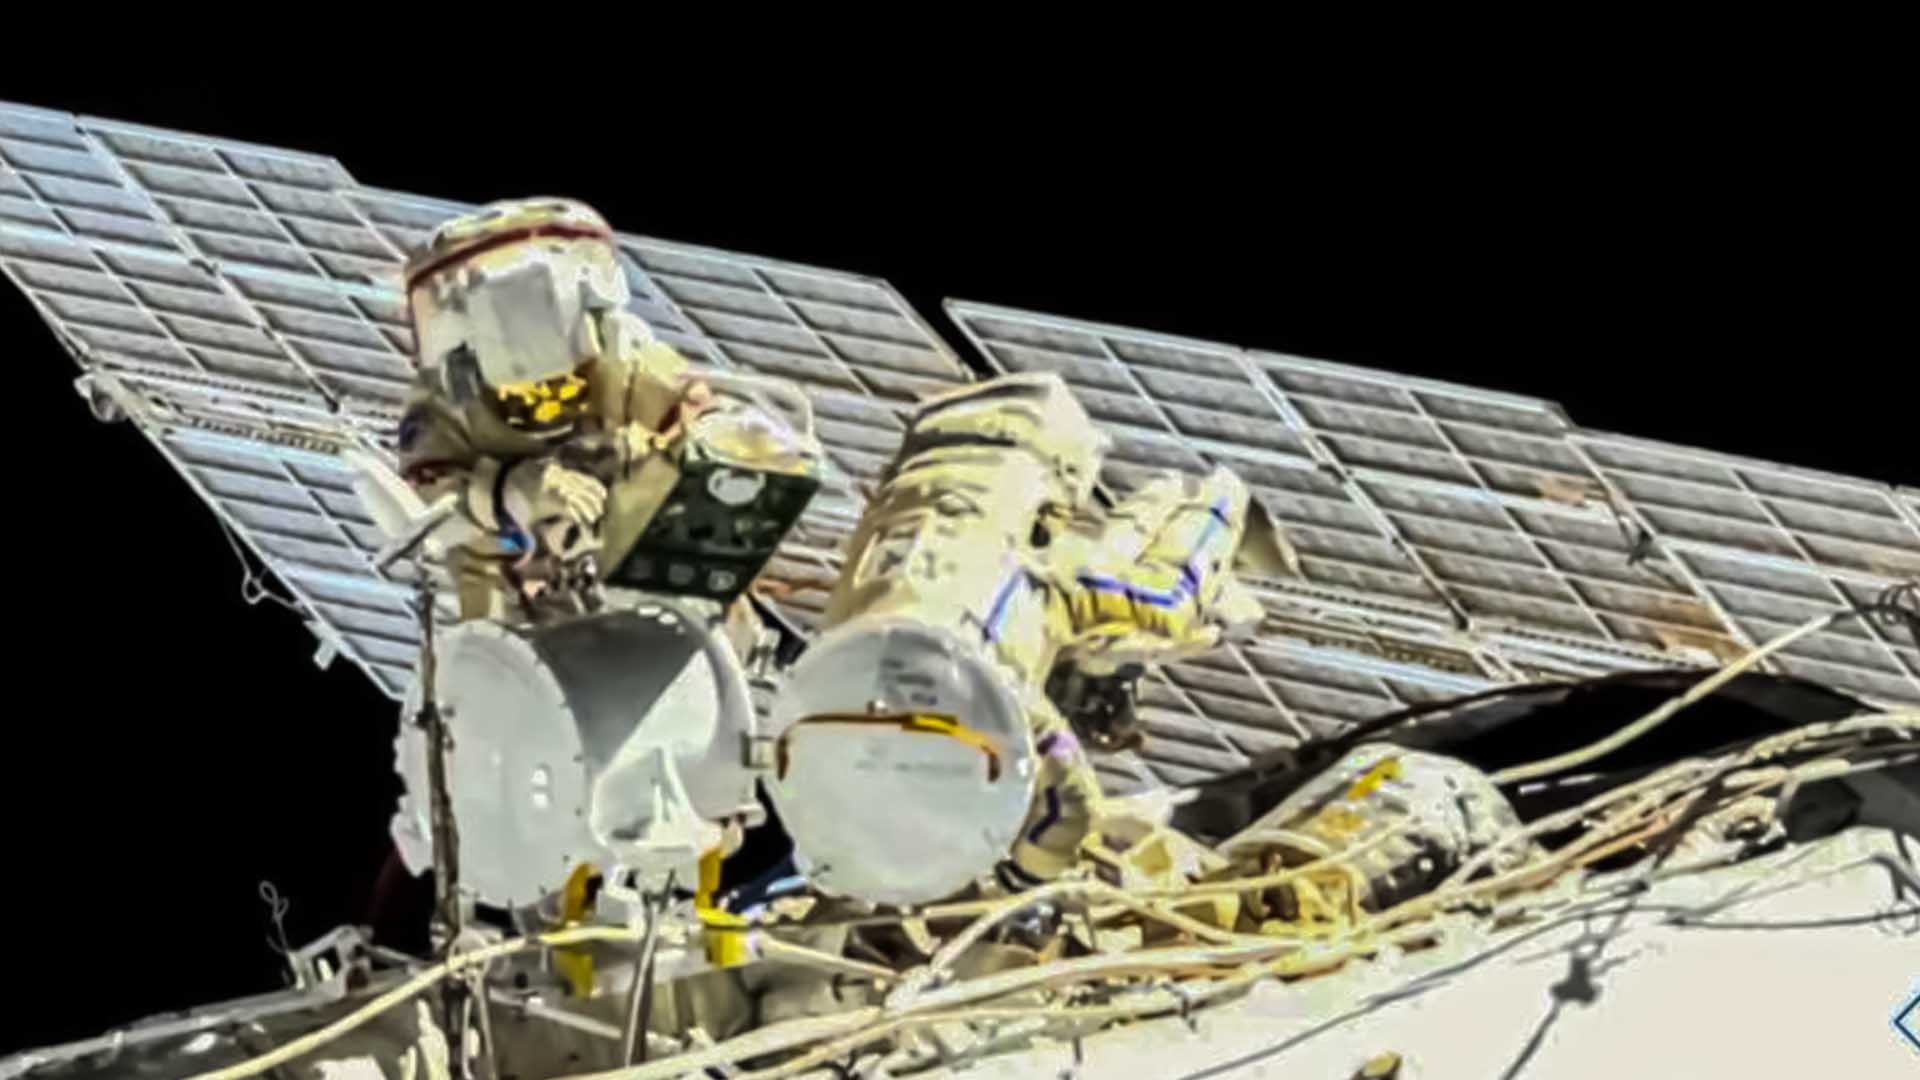 Russian cosmonaut and Italian astronaut complete a 7-hour spacewalk